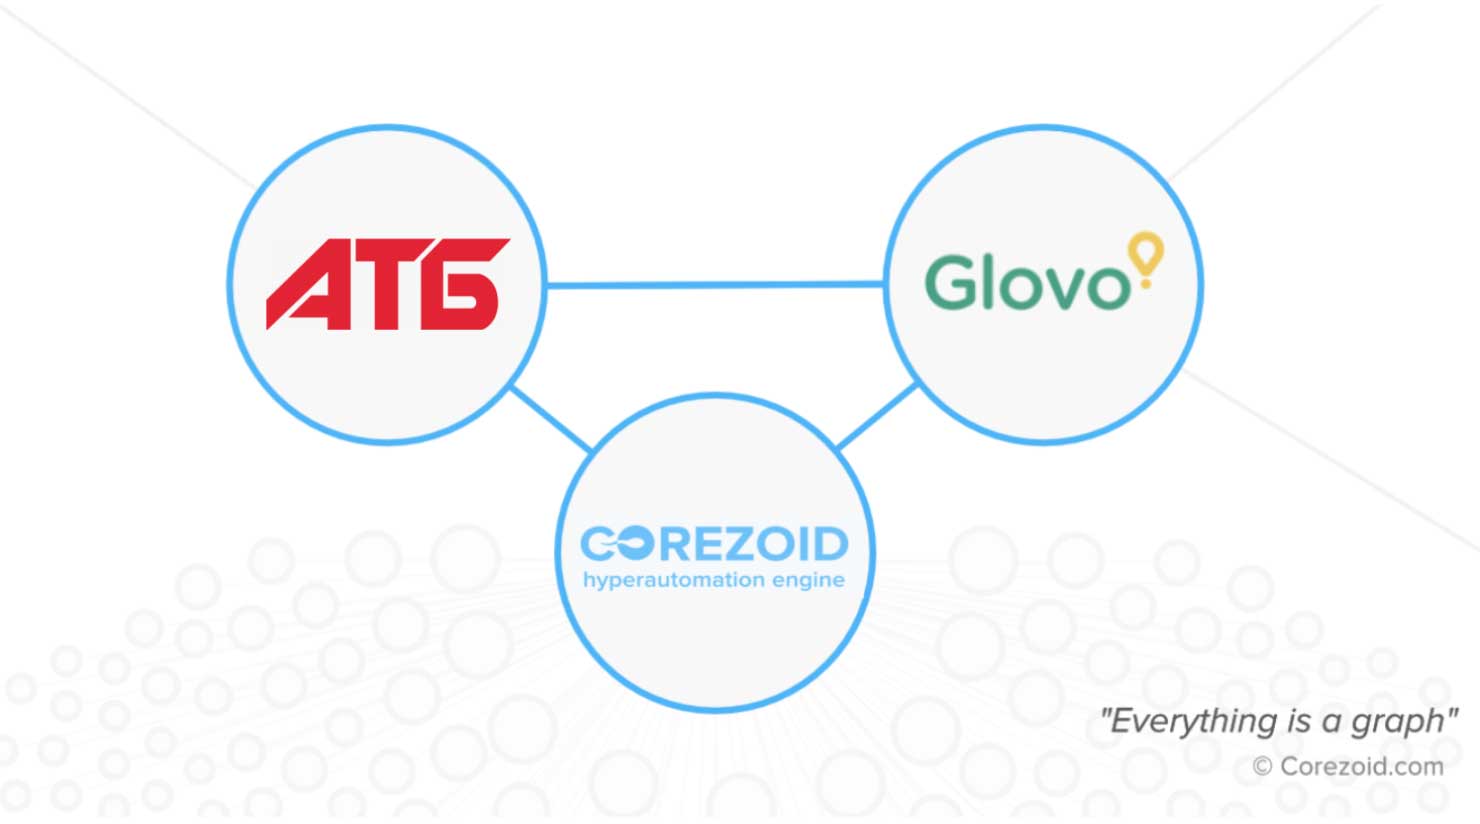 Glovo express delivery service started cooperation with ATB retail chain based on Corezoid Hyperautomation Engine